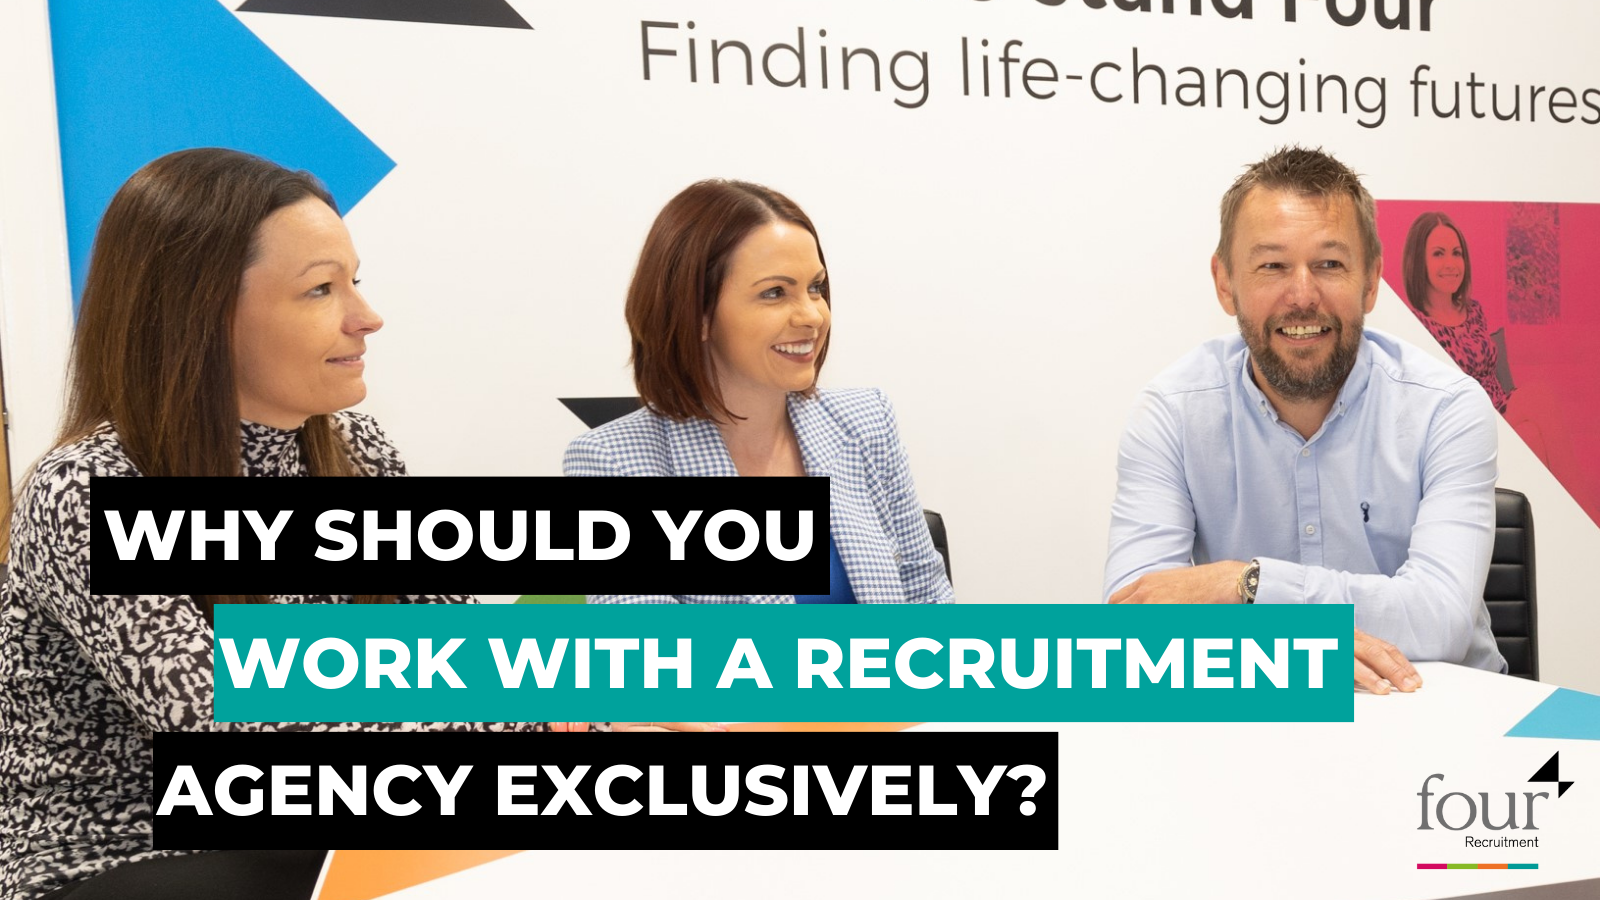 Why should you work with a recruitment agency exclusively?